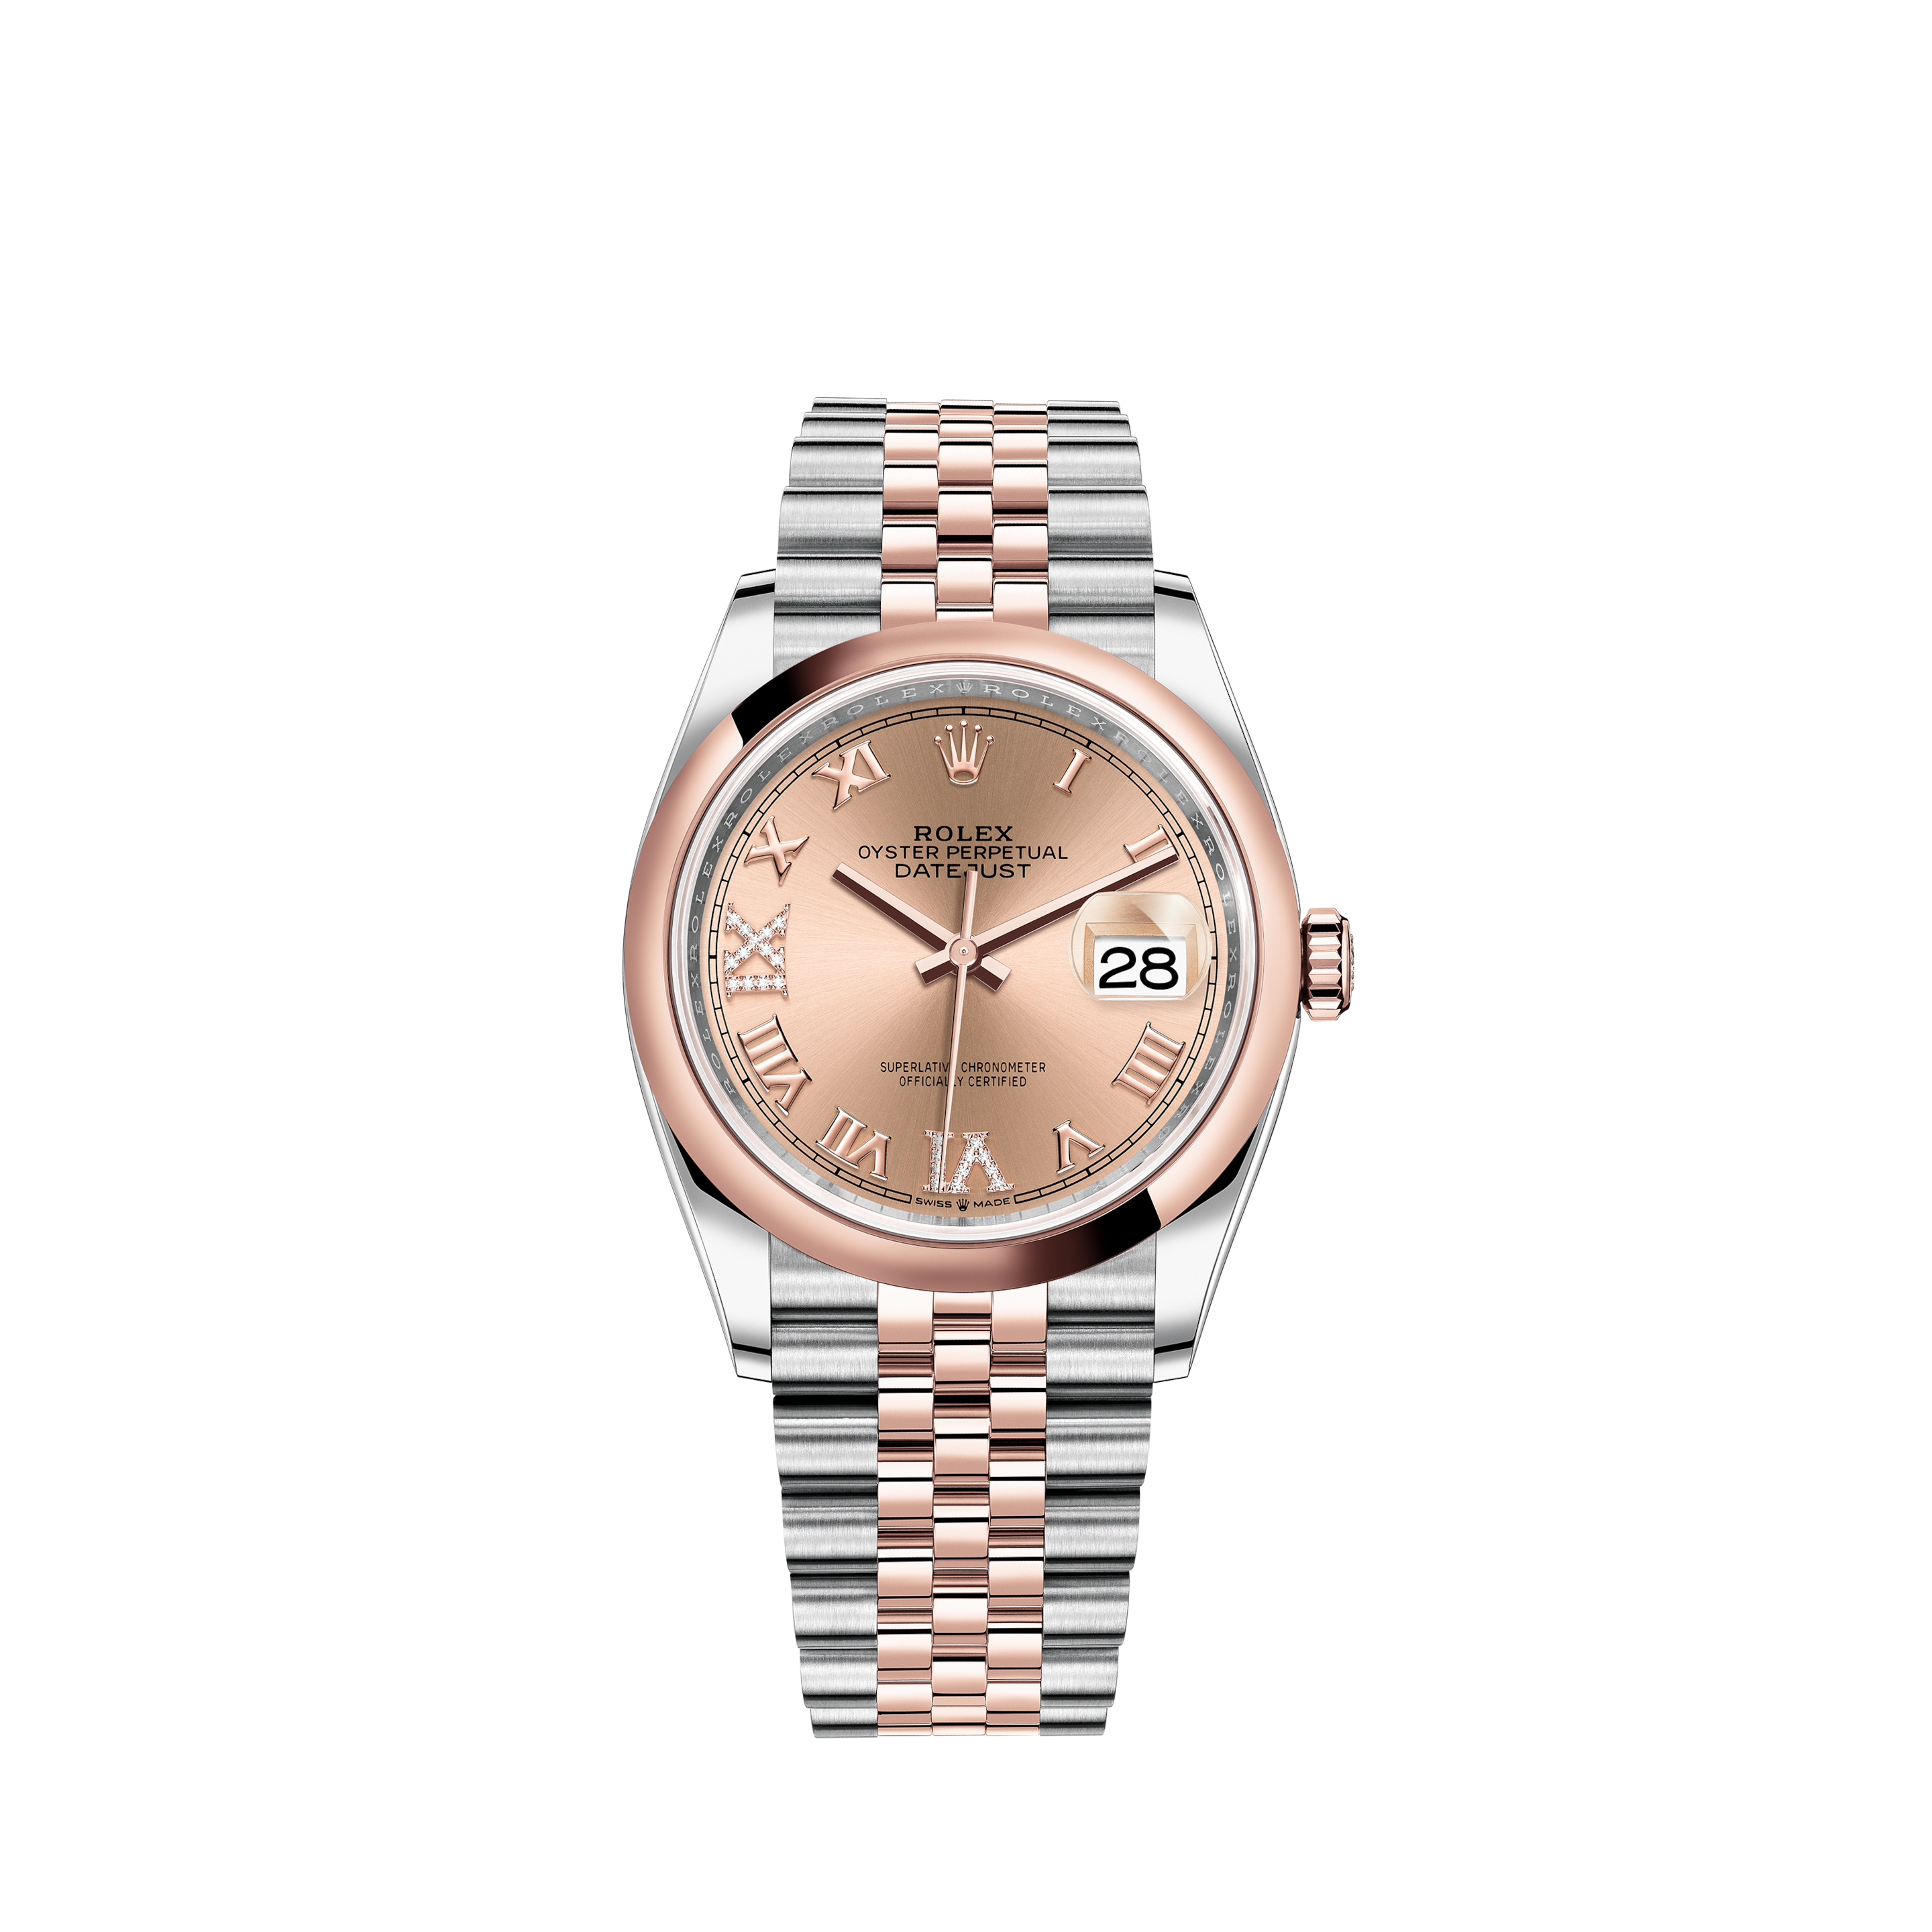 Rolex Oyster Perpetual 177210 Mid Size ser. Z anno 2007 Full setRolex Oyster Perpetual 18ct Pink Gold Cal.A260 1952